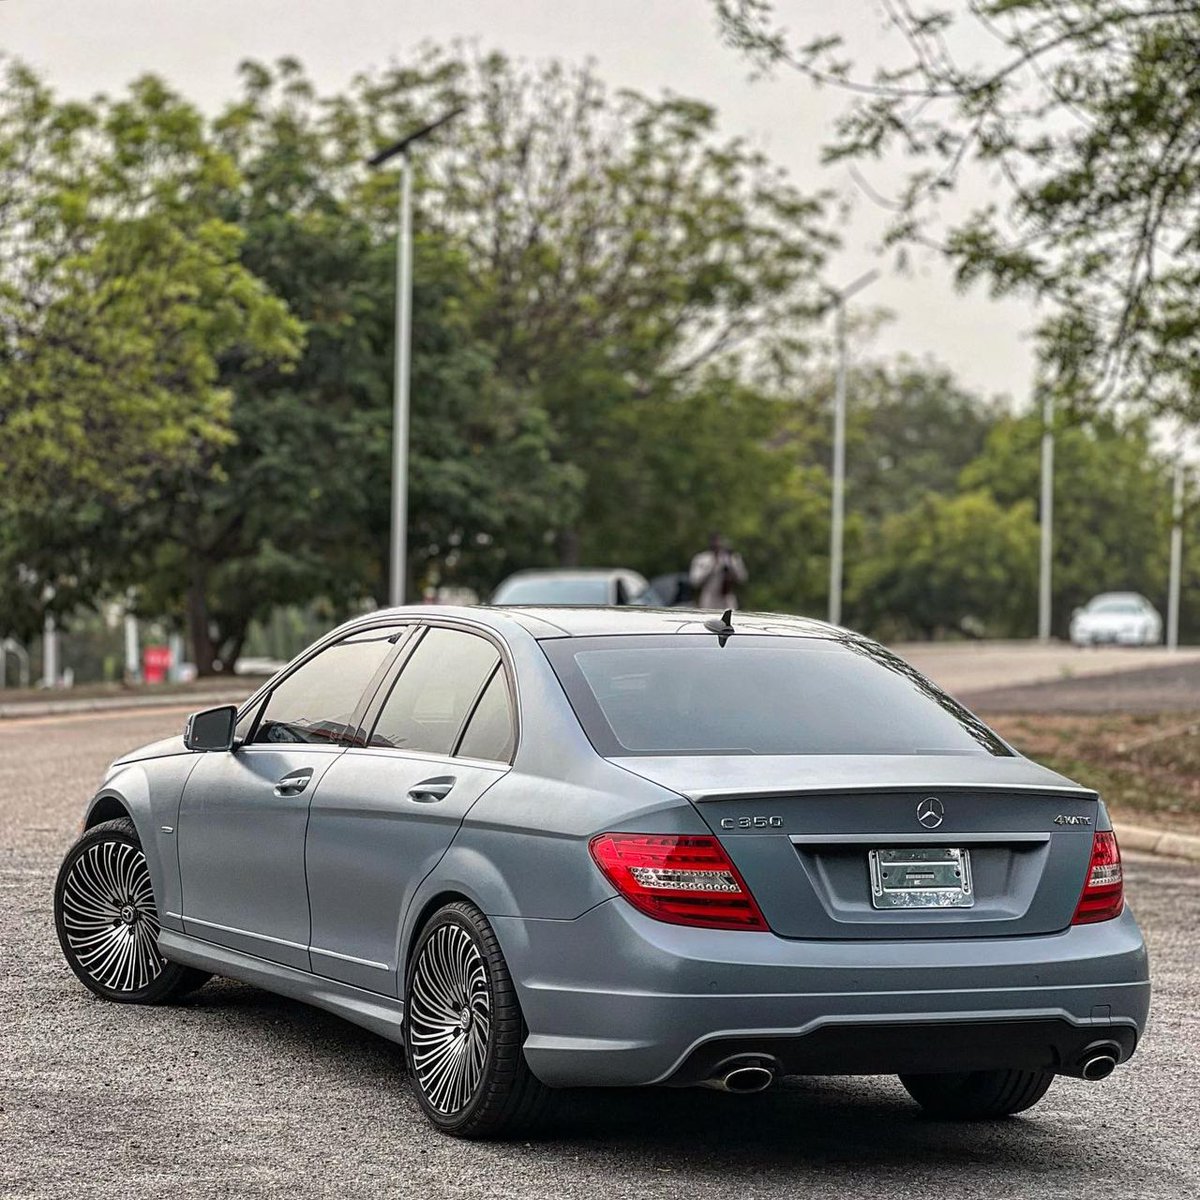 New listing ( please Retweet)🙏🏾 Super clean Foreign Used 2012 Mercedes-Benz C350 available in excellent condition ☎️: 08118170832 Location: Abuja Price: 7.3m #AbujaTwitterCommunity Binani | Maria | iPhone 15